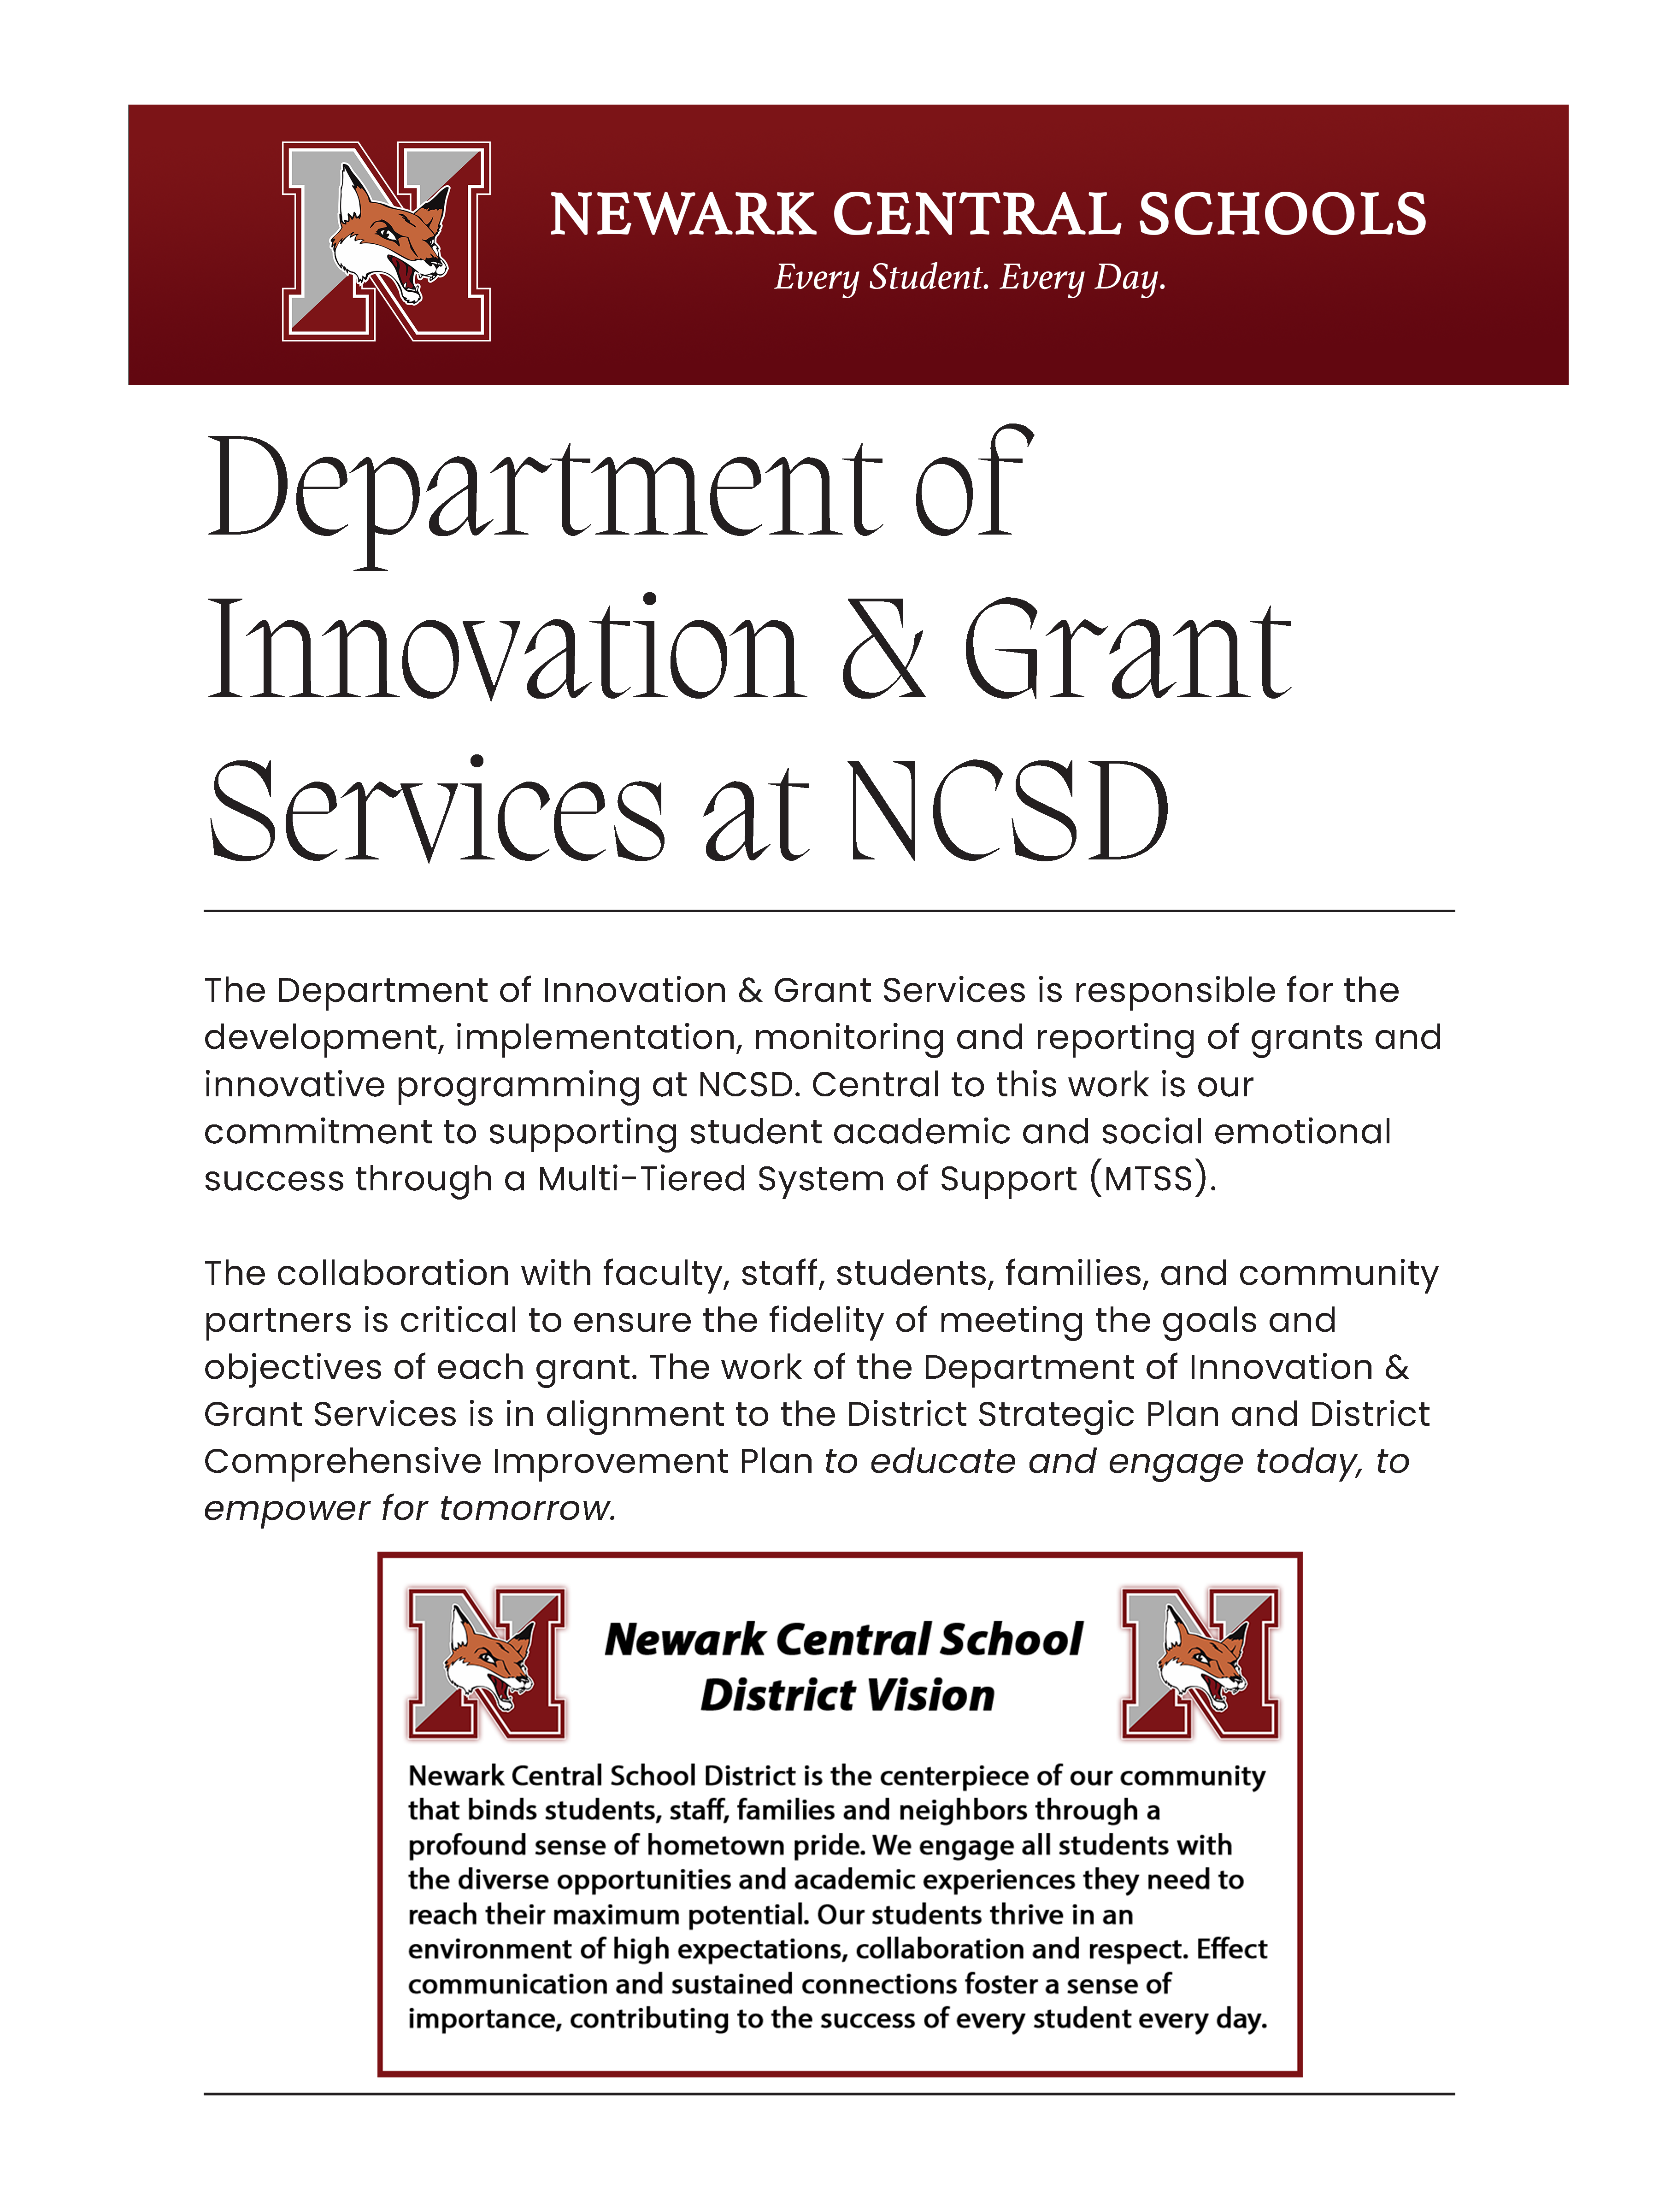 Information on our Innovative Programming and Grant Services